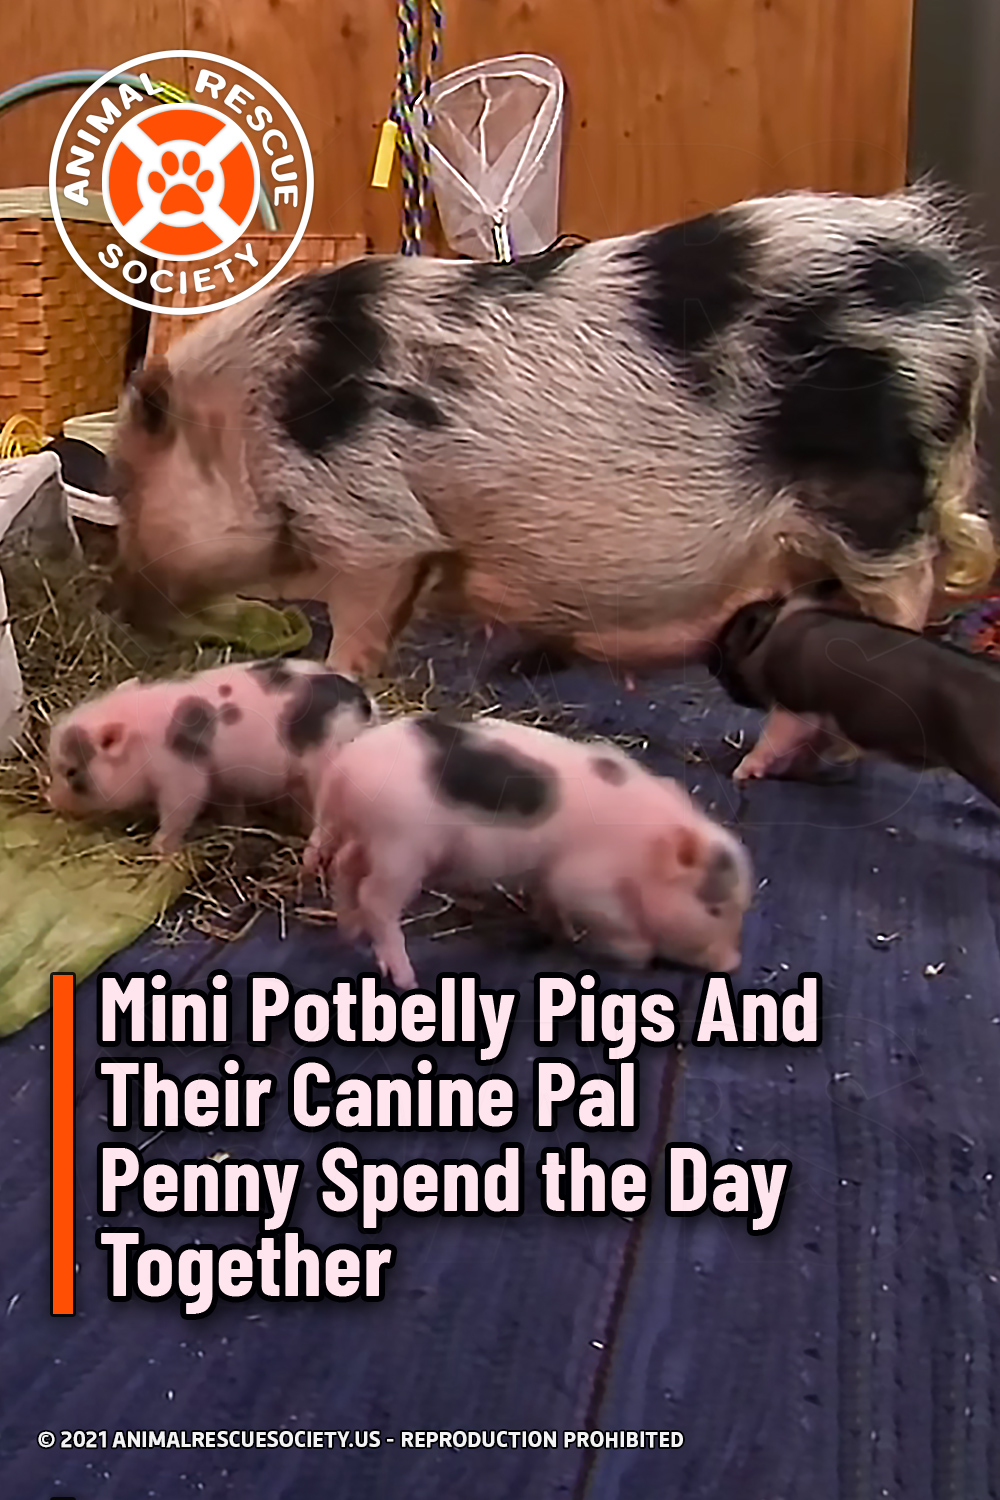 Mini Potbelly Pigs And Their Canine Pal Penny Spend the Day Together